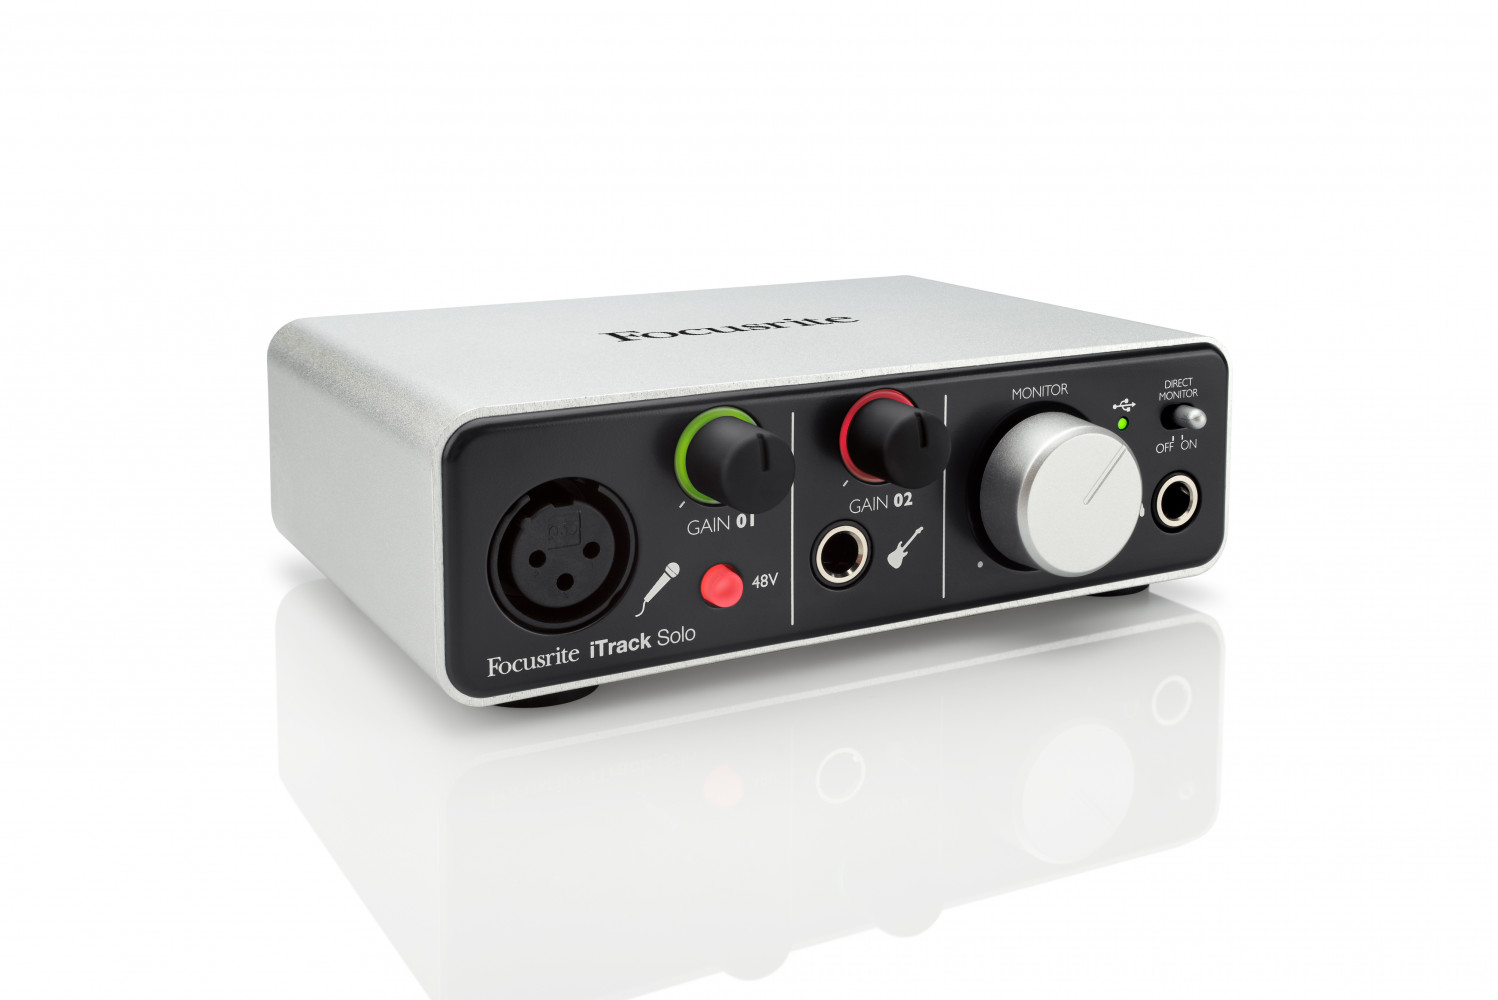 Focusrite iTrack Solo Audio Interface with Lightning Connector